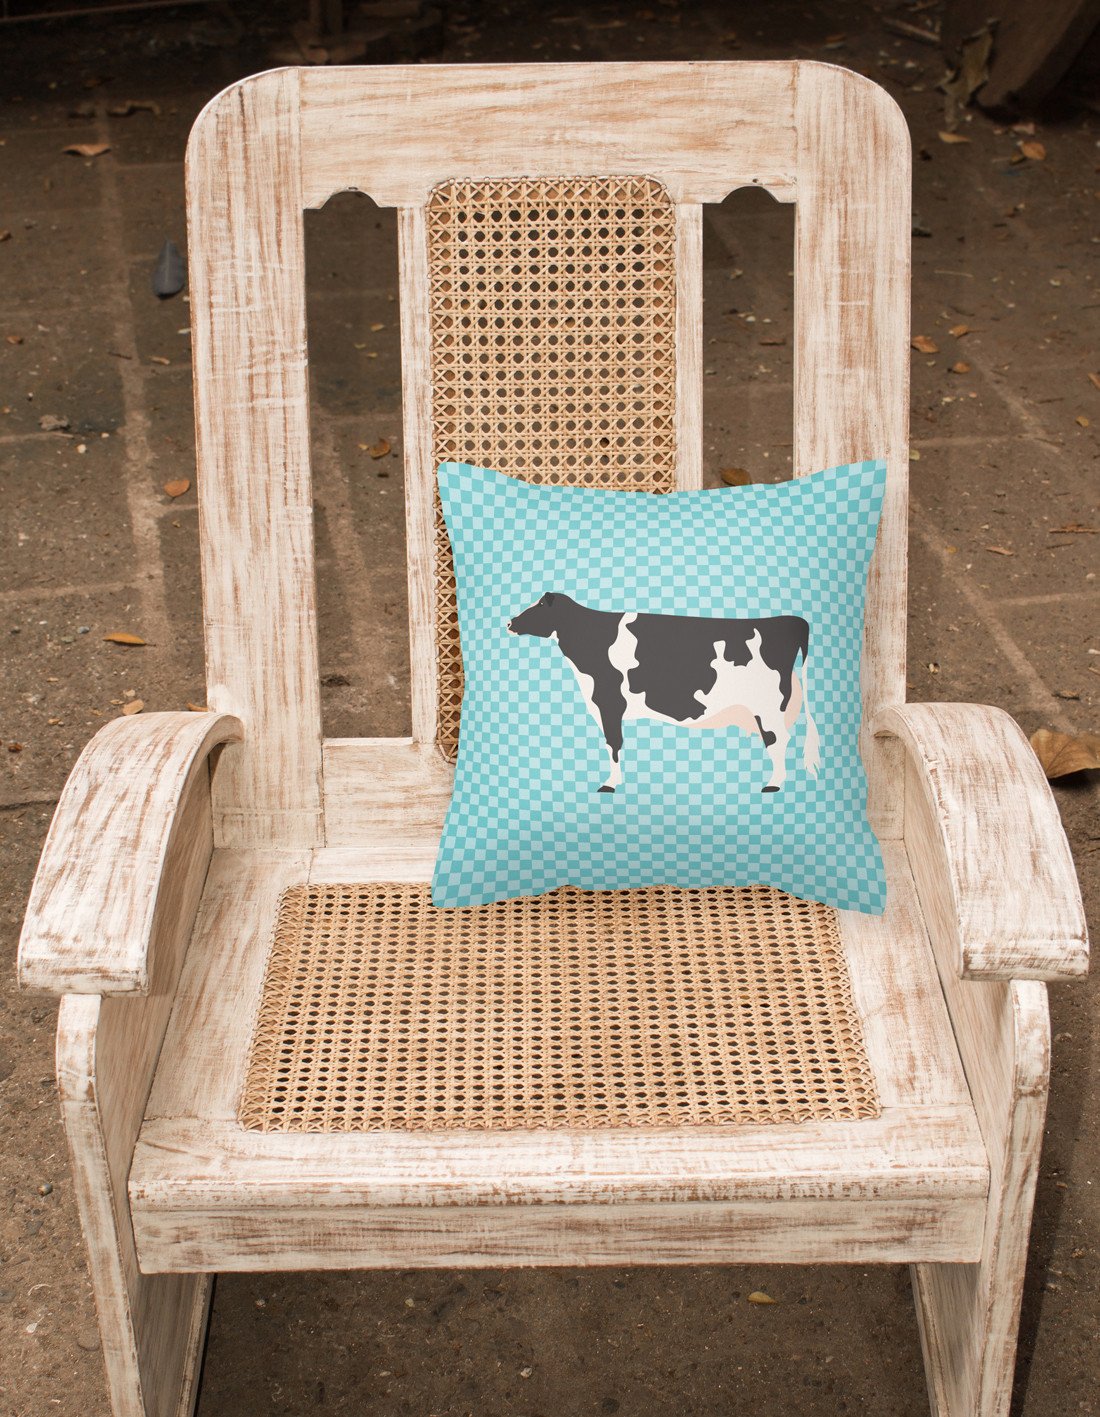 Holstein Cow Blue Check Fabric Decorative Pillow BB7996PW1818 by Caroline's Treasures